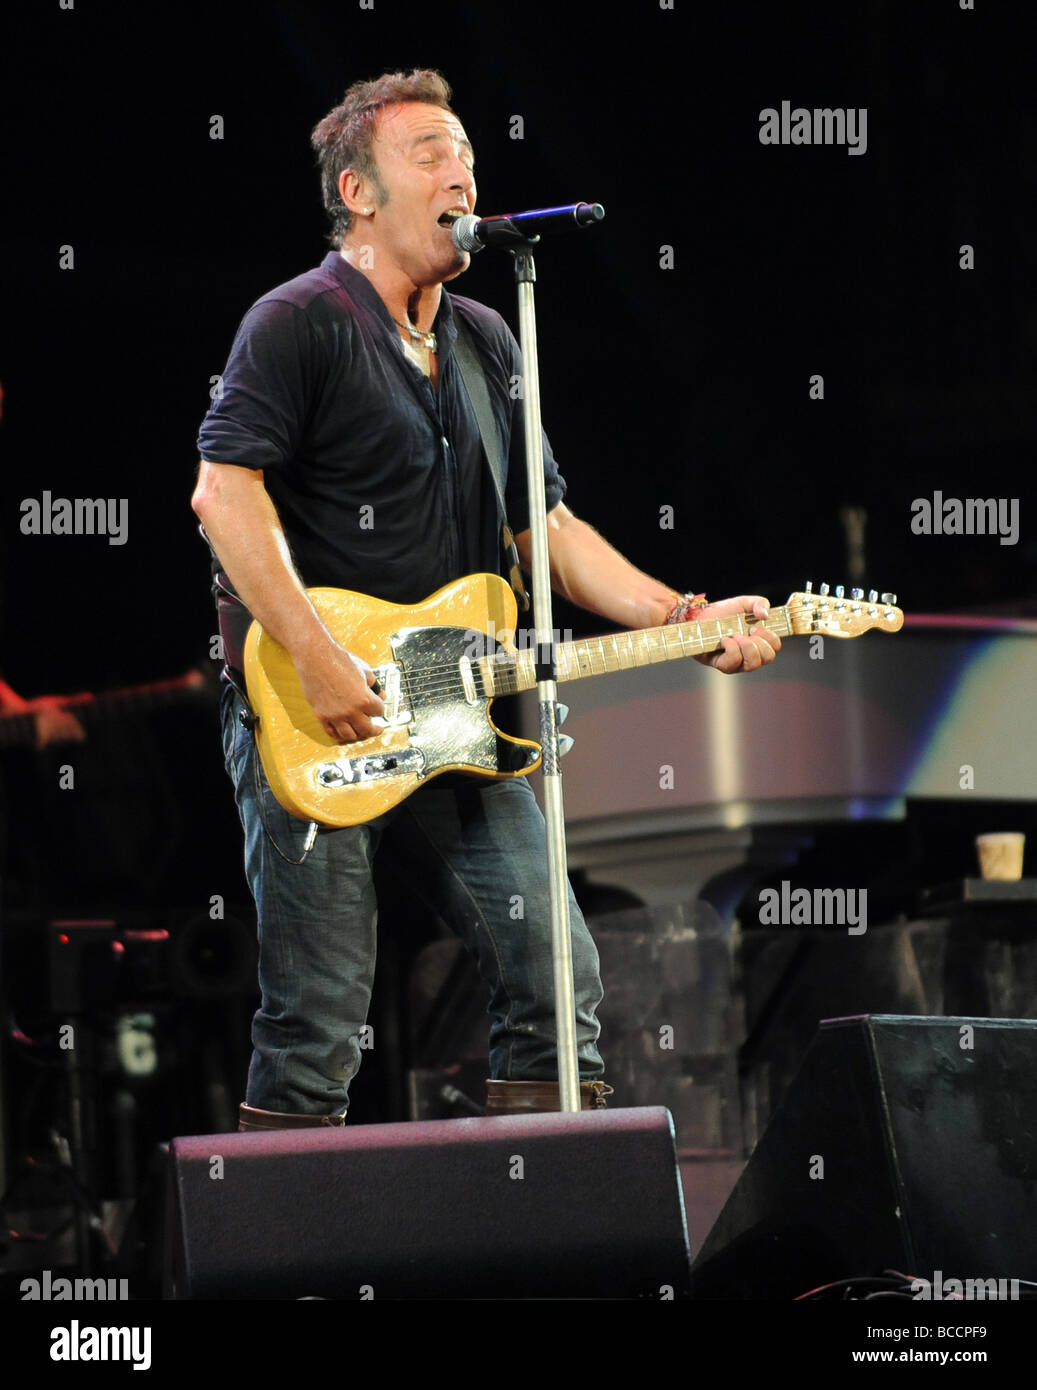 Bruce Springsteen and the E Street band glastonbury 2009 Stock Photo